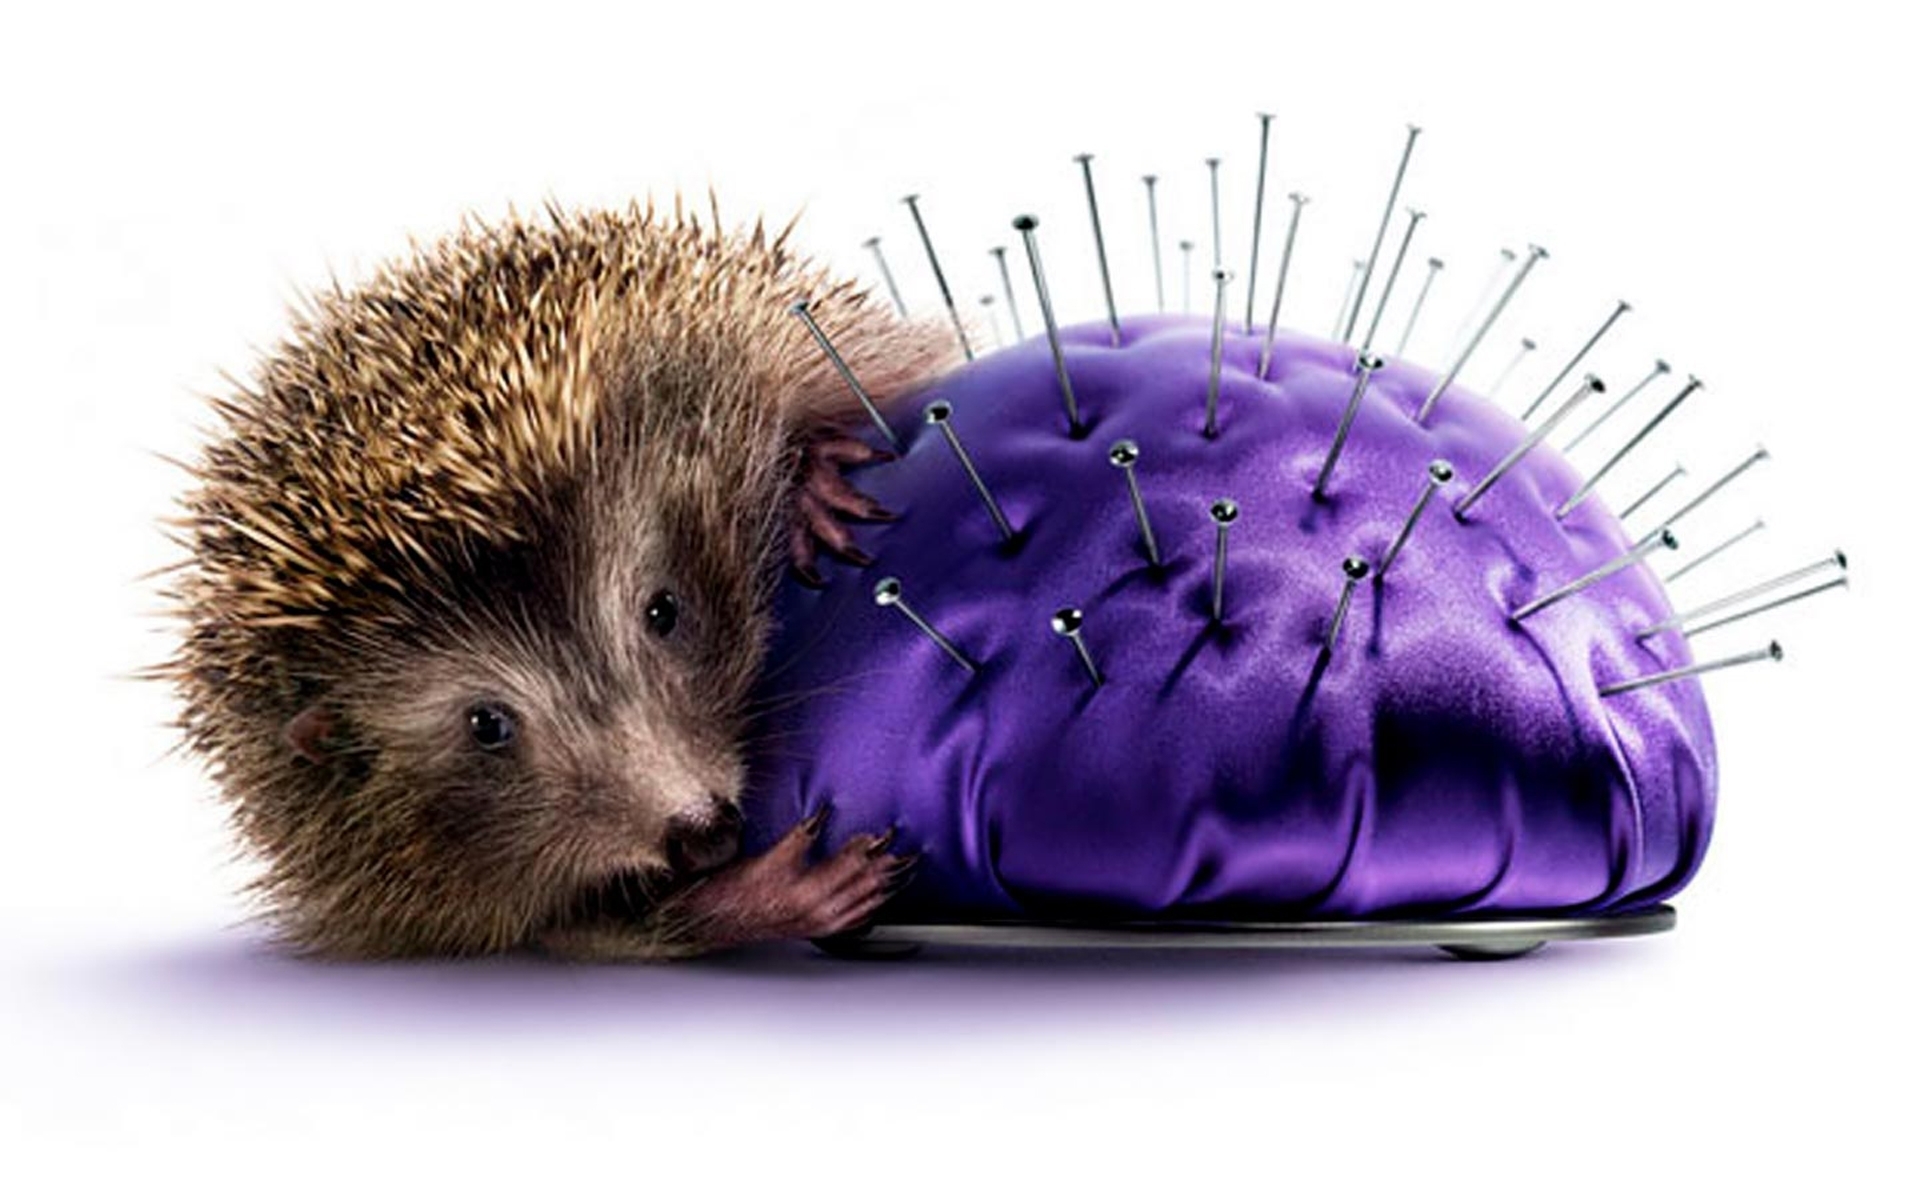 41423 download wallpaper animals, hedgehogs, objects screensavers and pictures for free